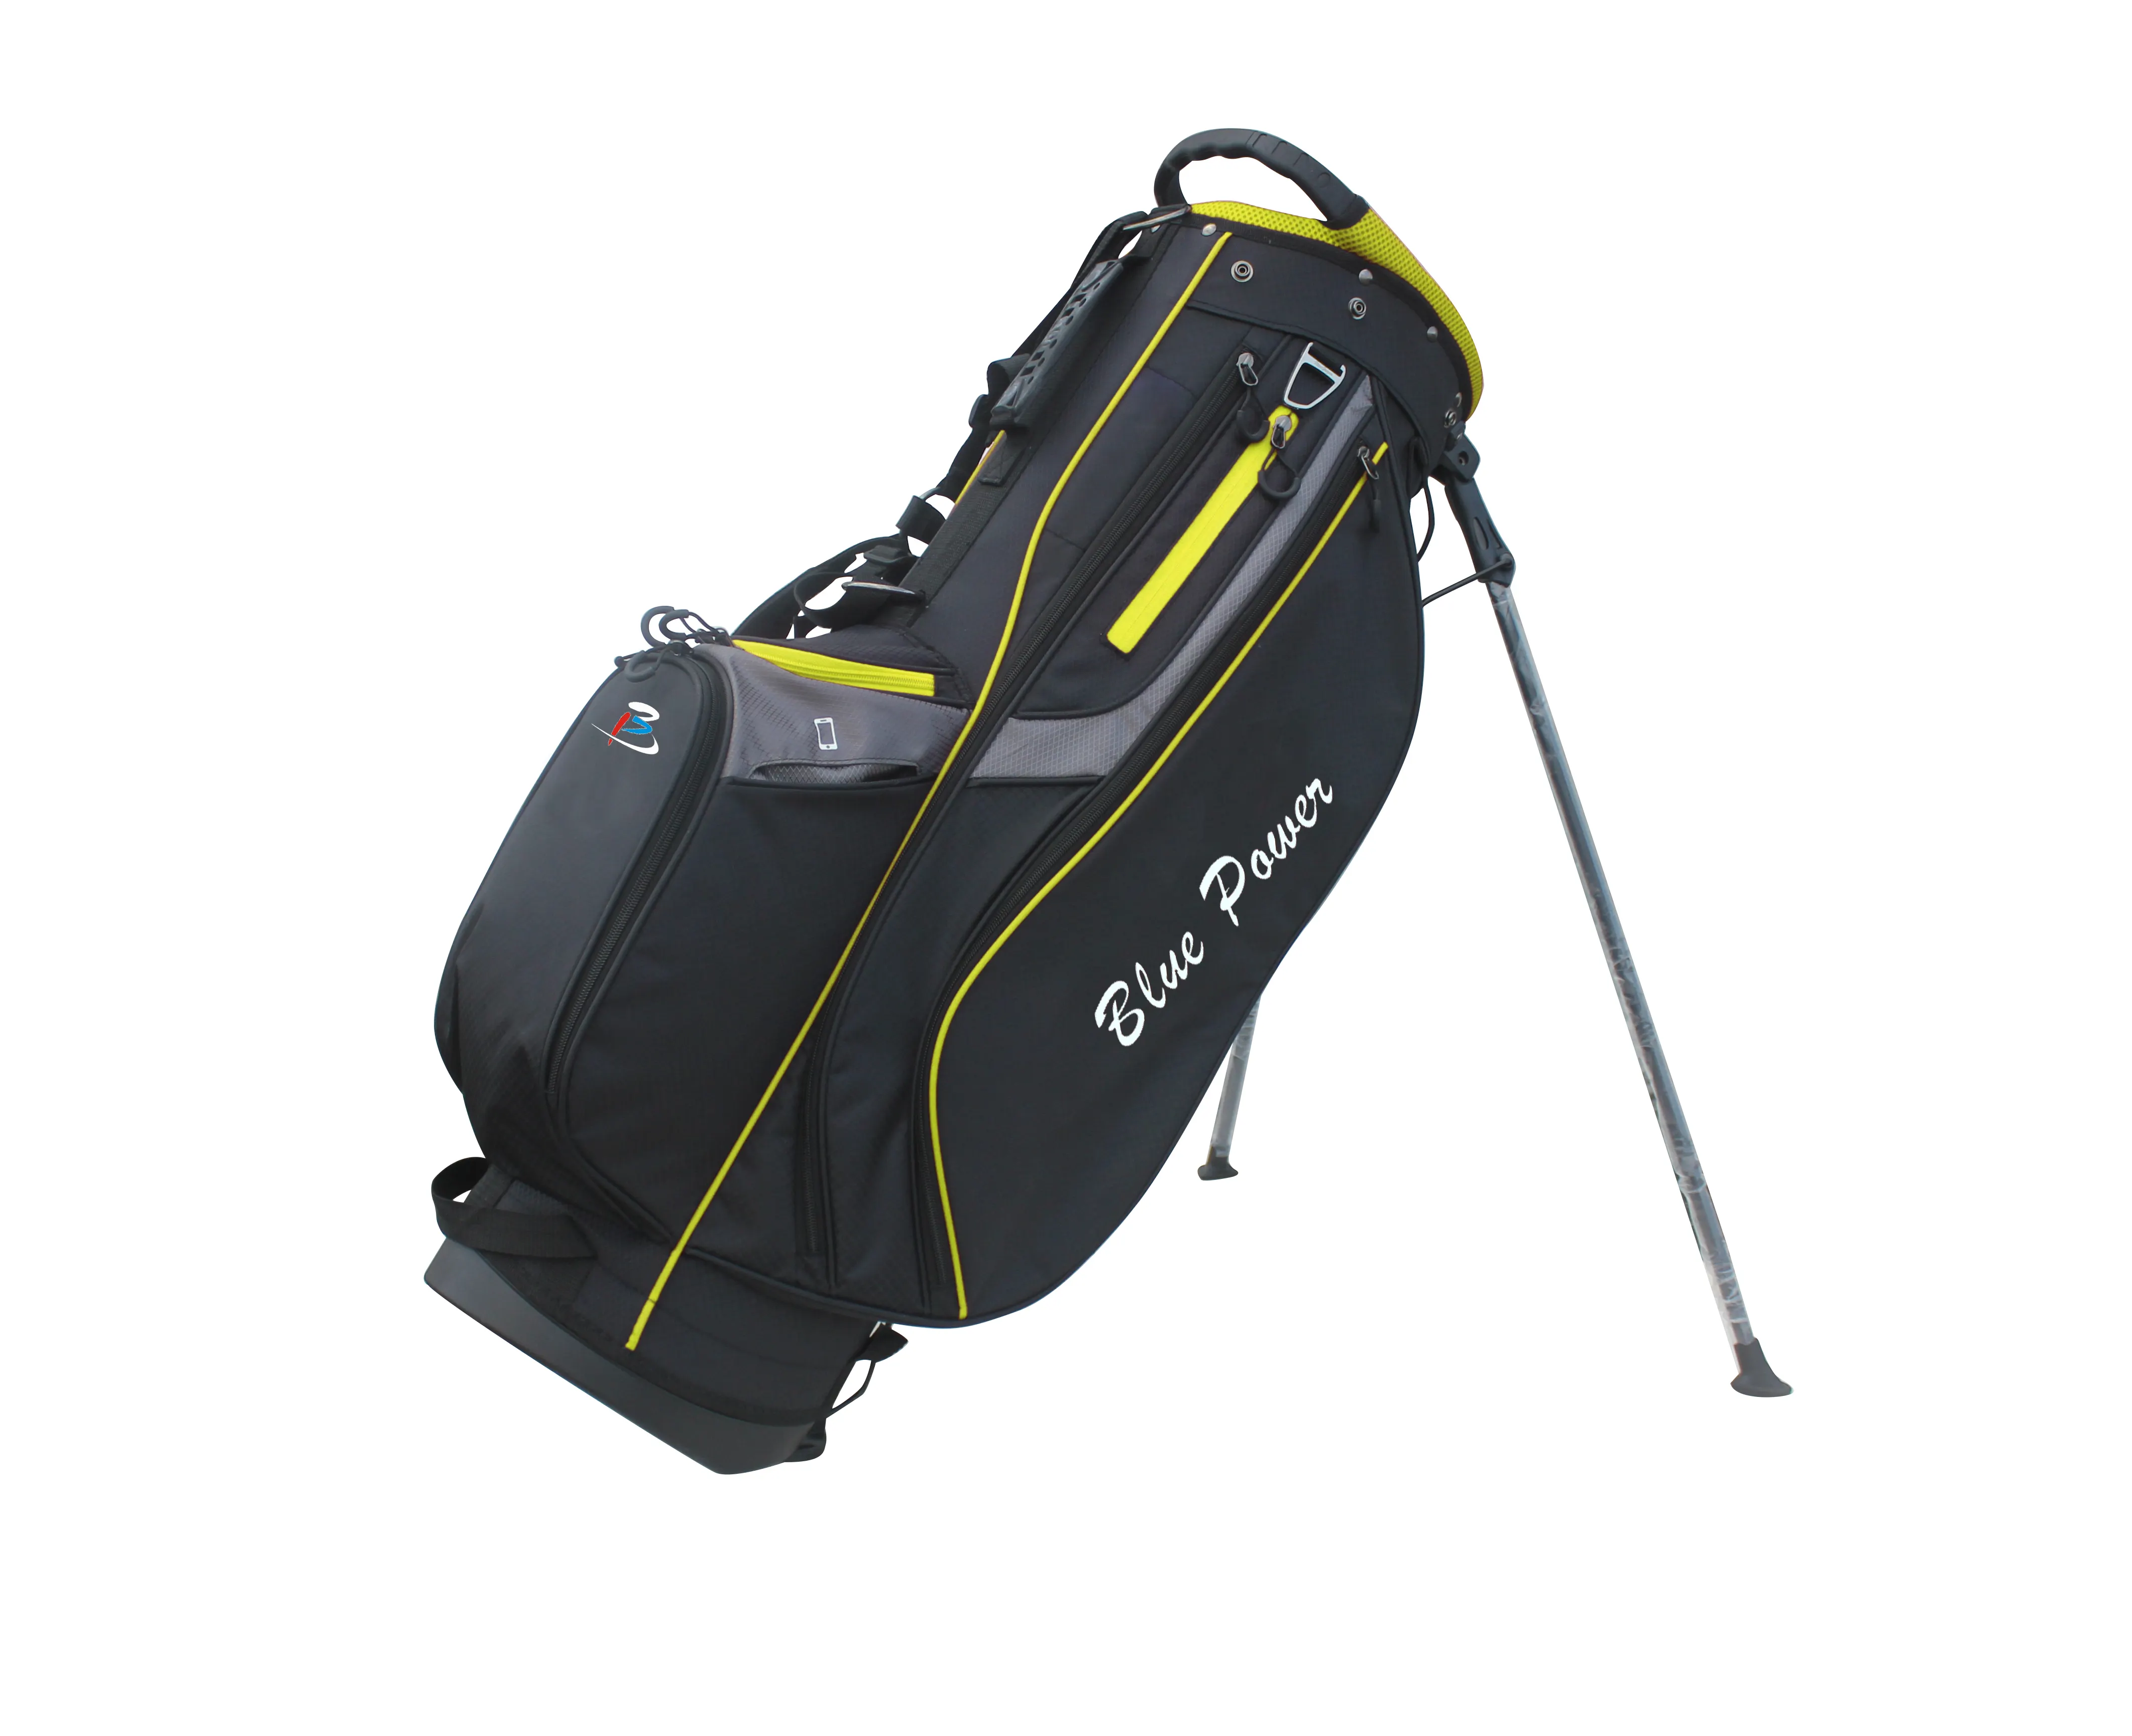 OEM stand ogio golf bags for sale